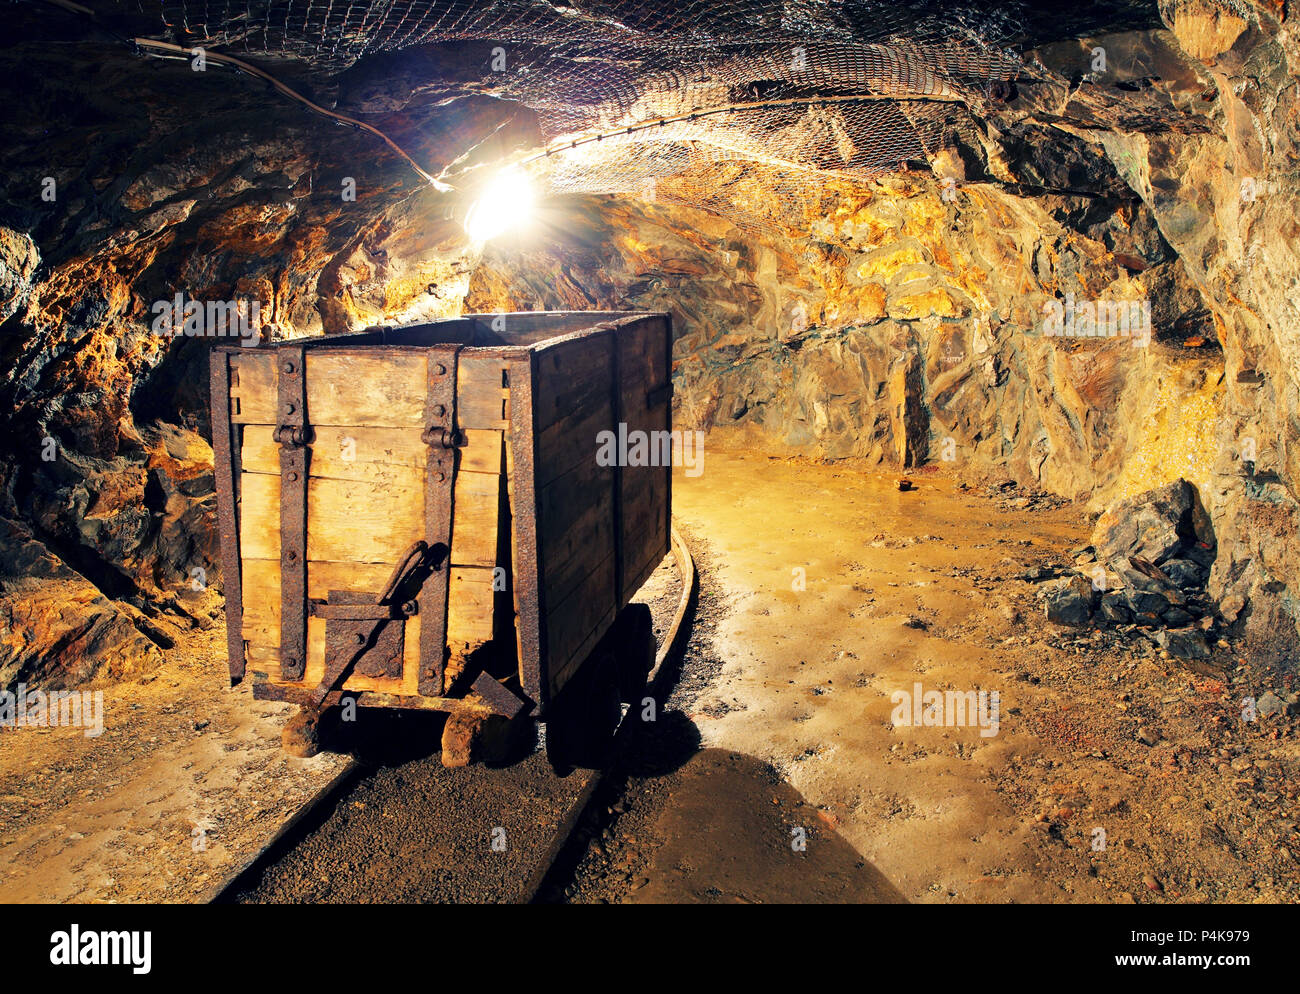 Mining cart in silver, gold, copper mine Stock Photo